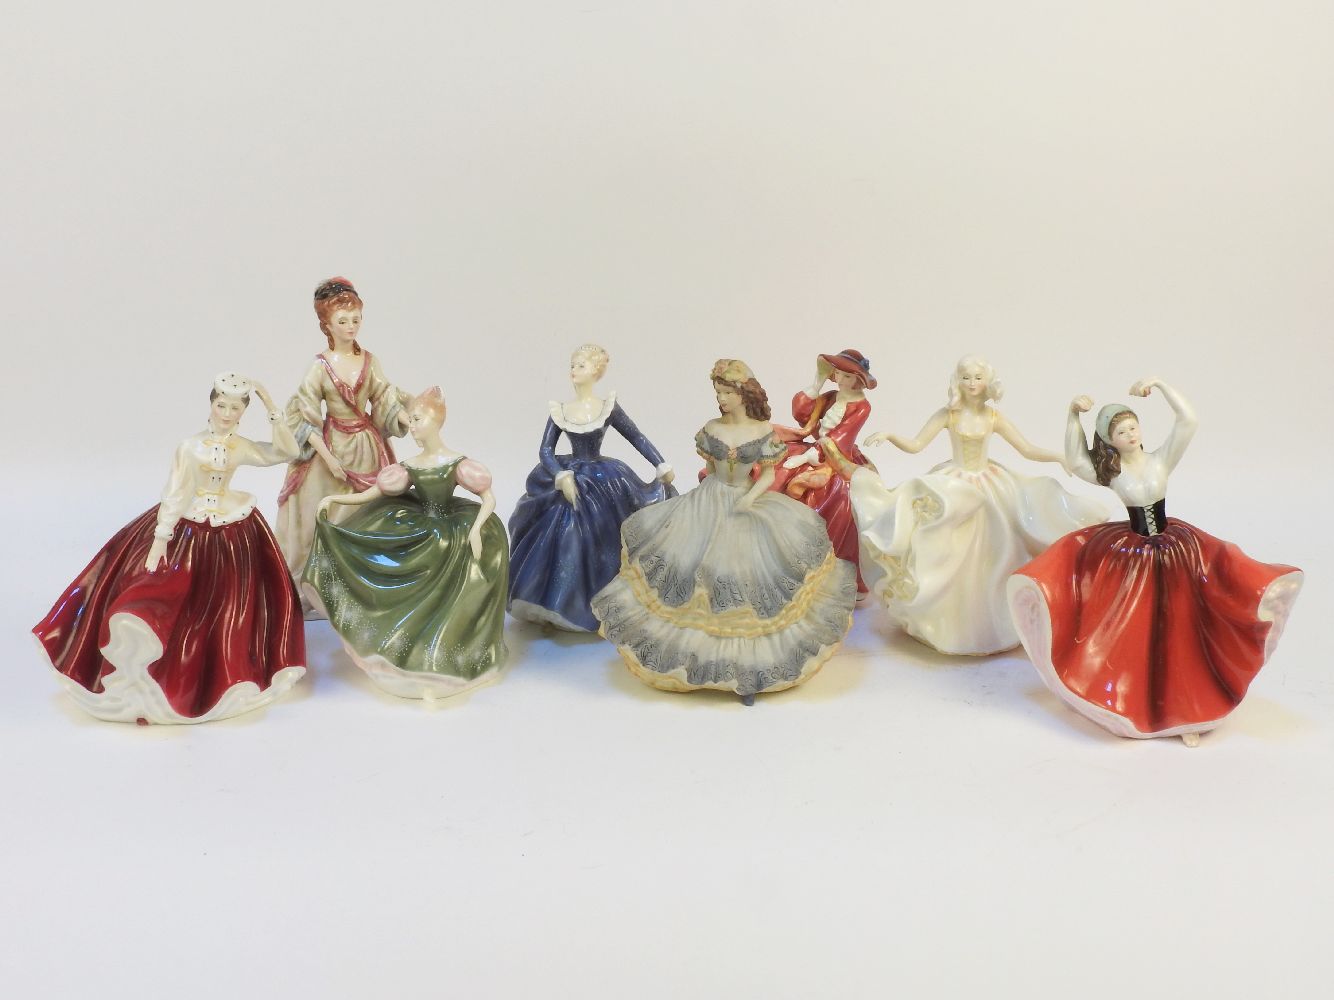 A Royal Doulton, figure 'Top O The Hill', HN1834, and a collection of six other similar